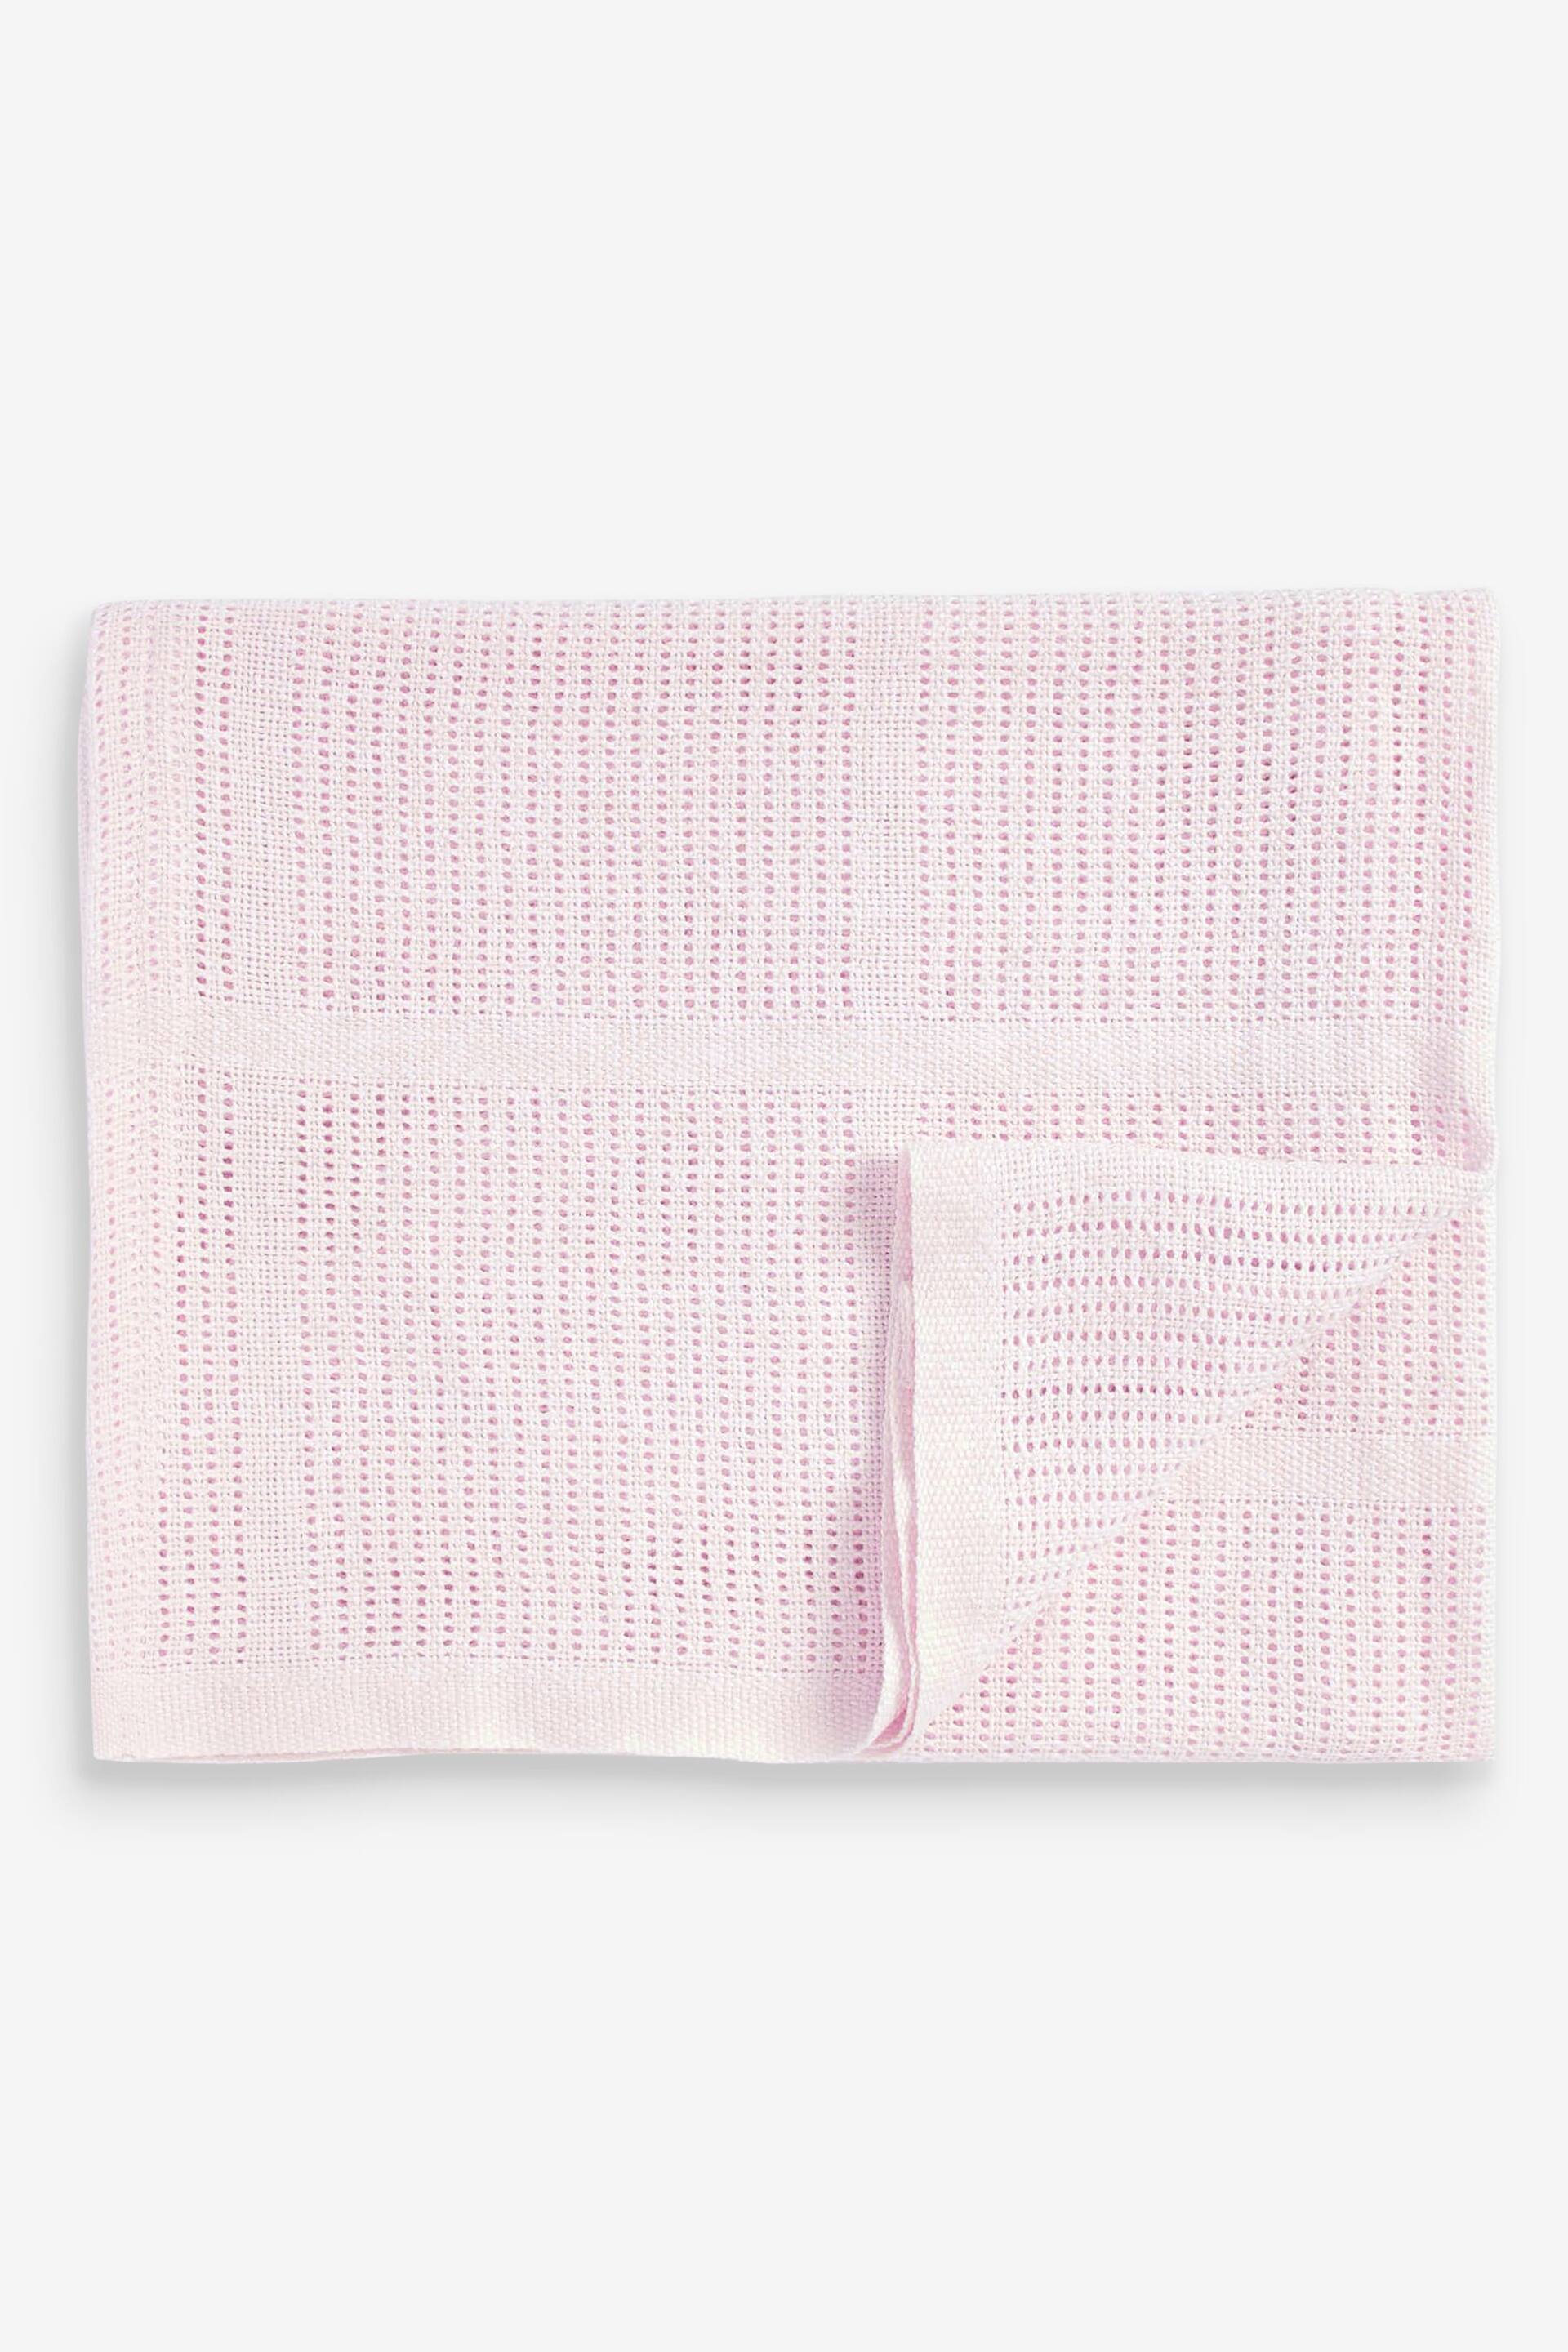 Pink Baby 100% Cotton Cellular Blanket - Image 4 of 7